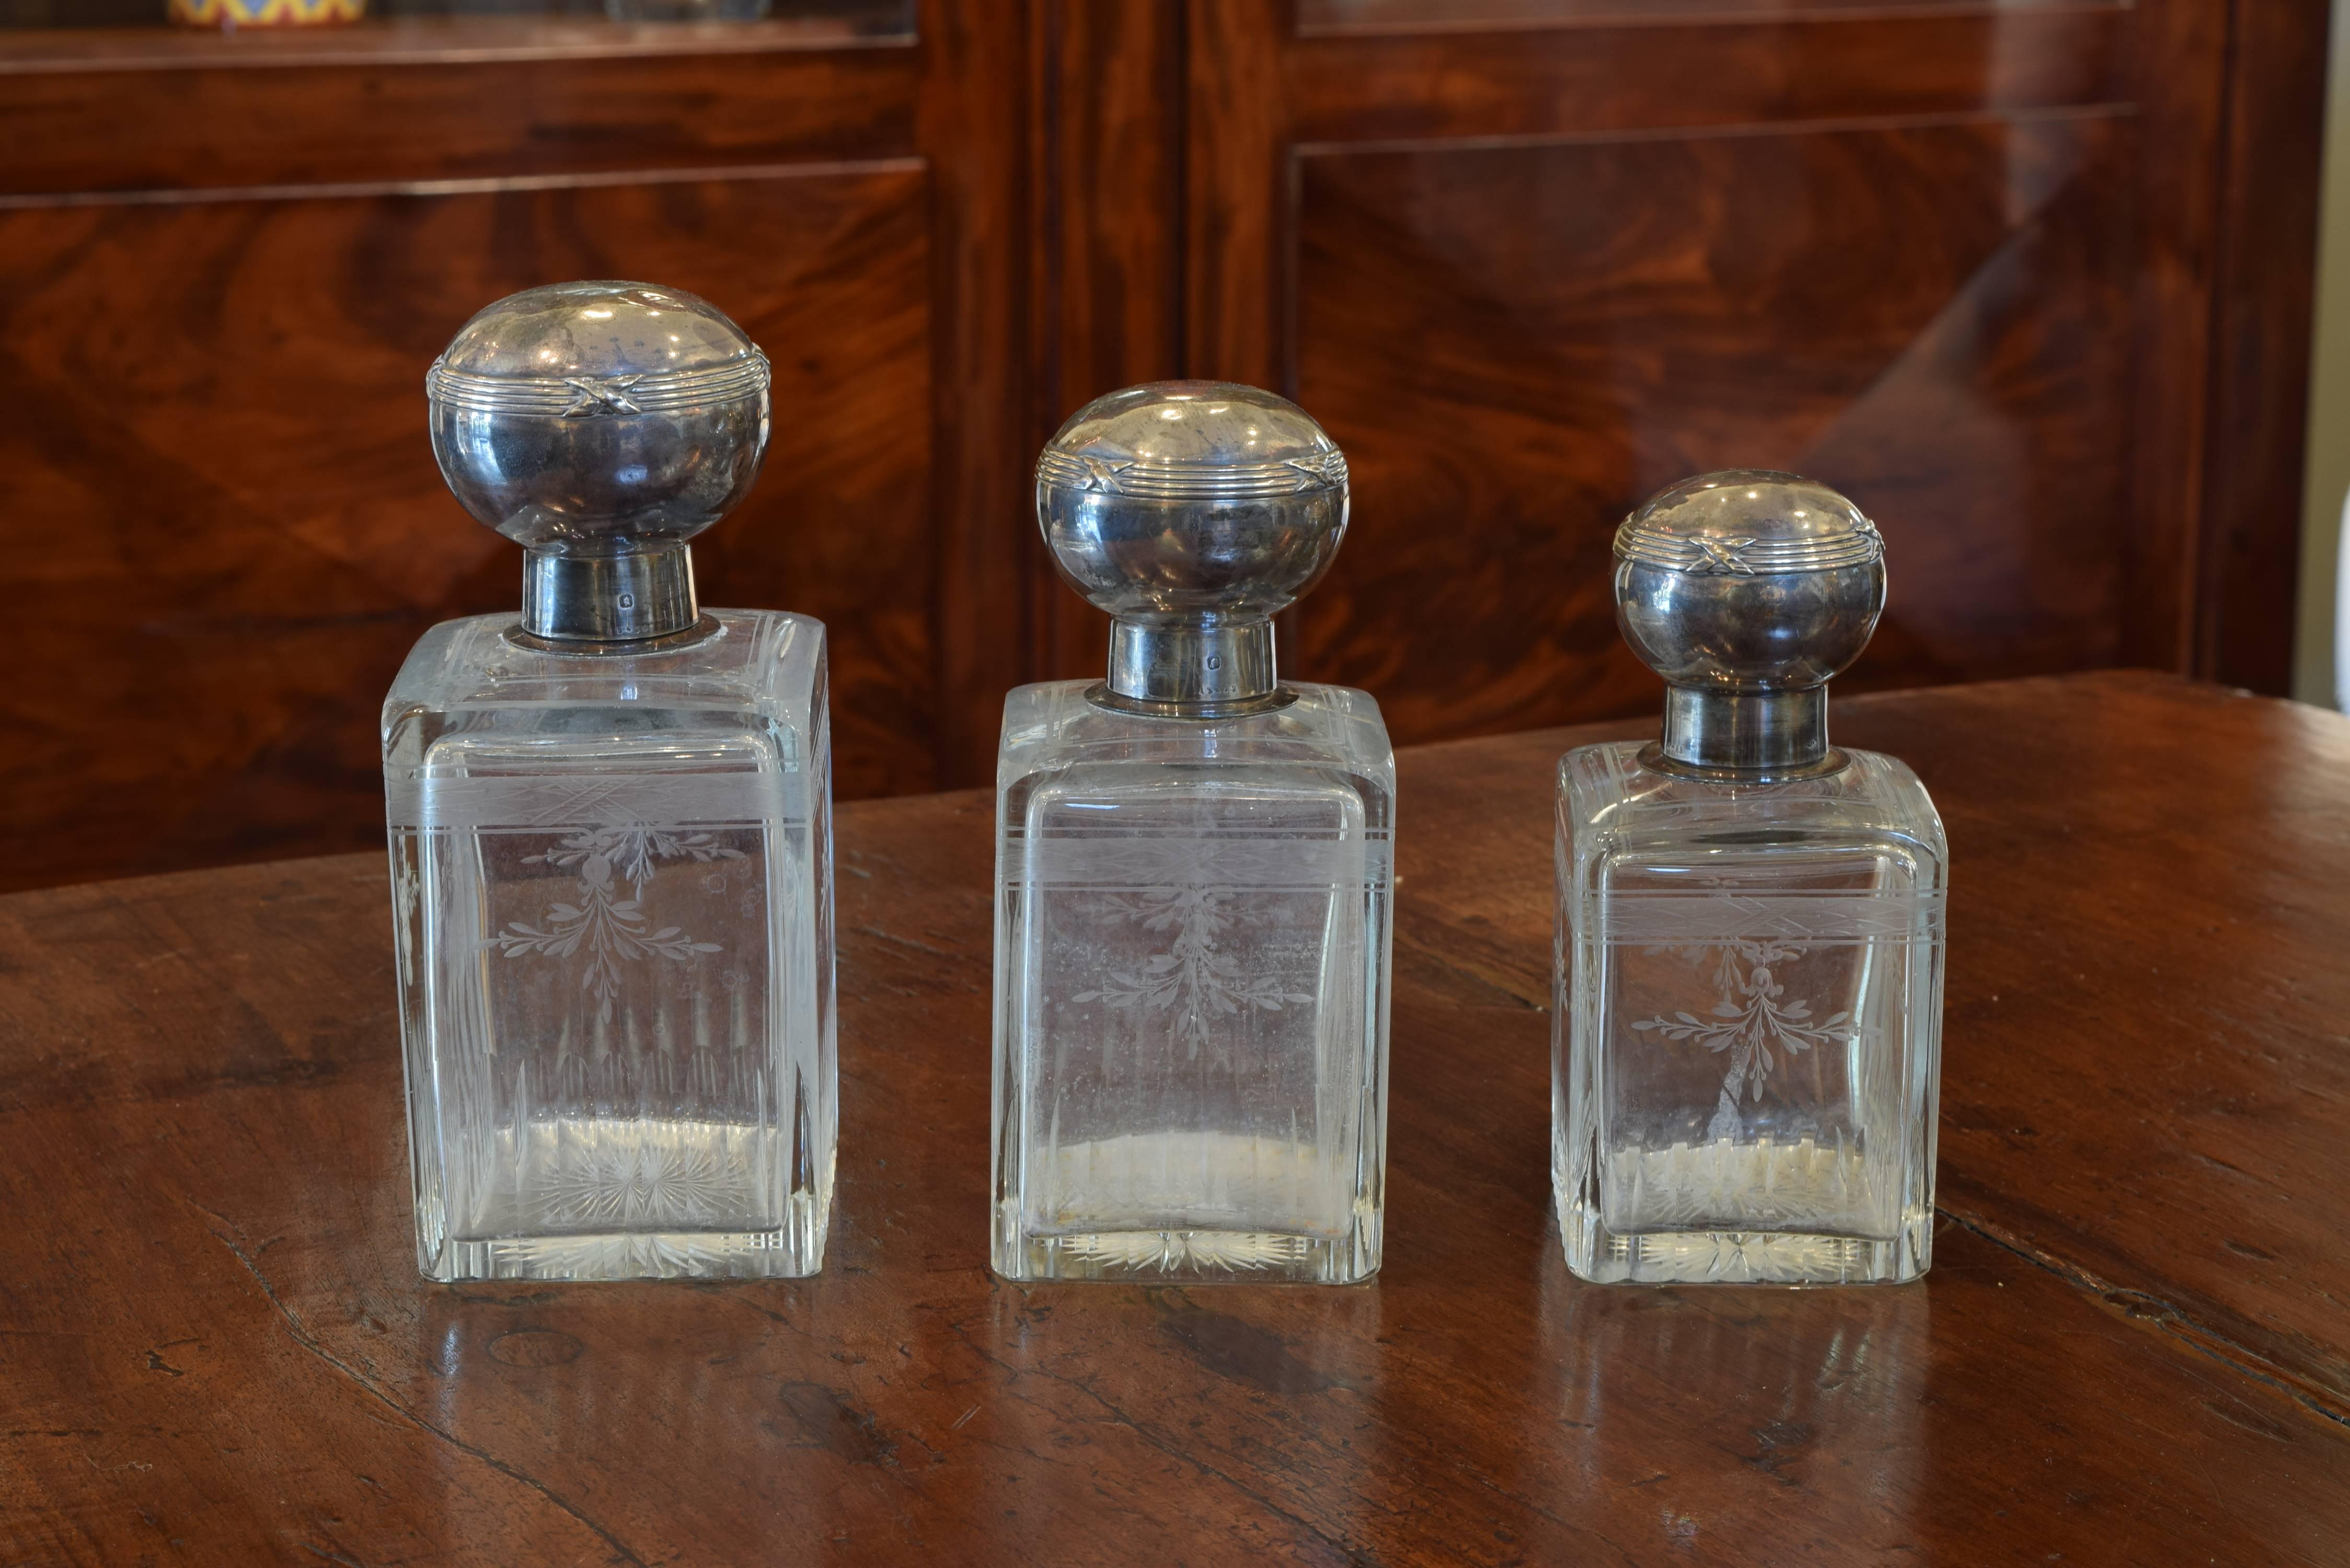 The three with matching decorations and of graduated size, the sterling silver tops with decorative banding, likely part of a larger vanity set, measurement is of the tallest of the set.